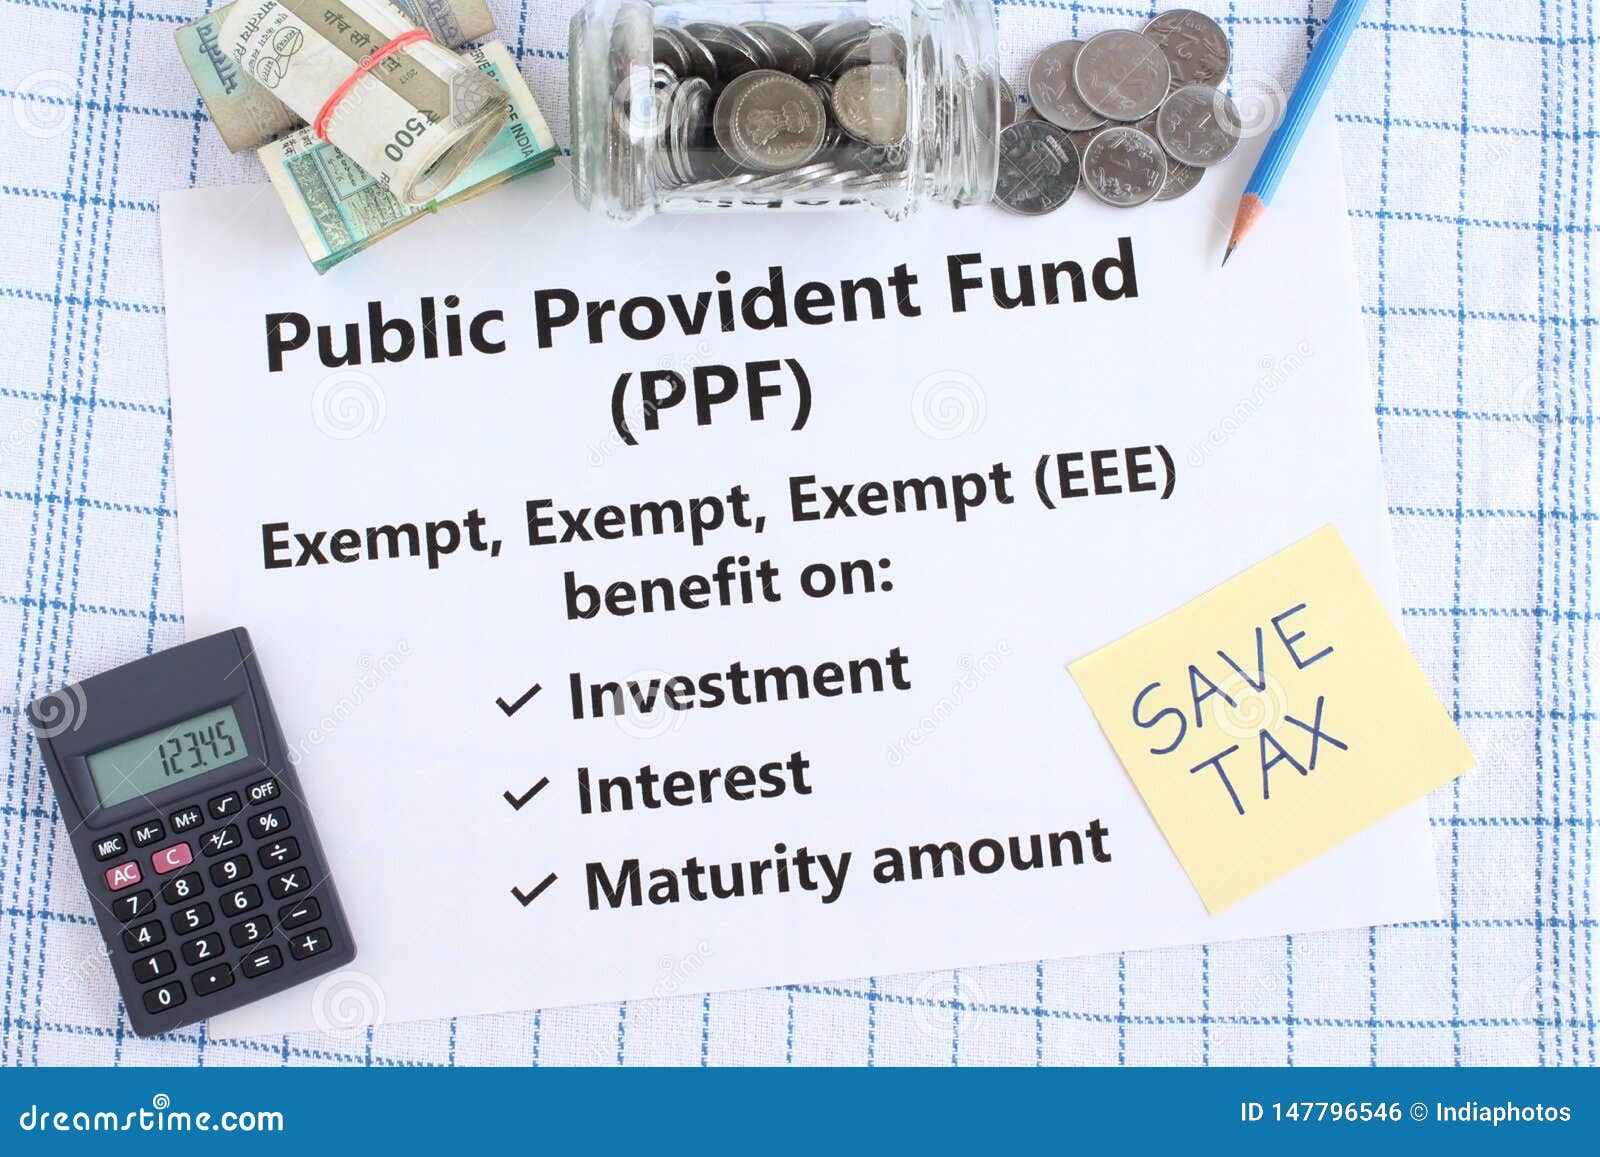 public provident fund an indian investment scheme with triple exempt benefit